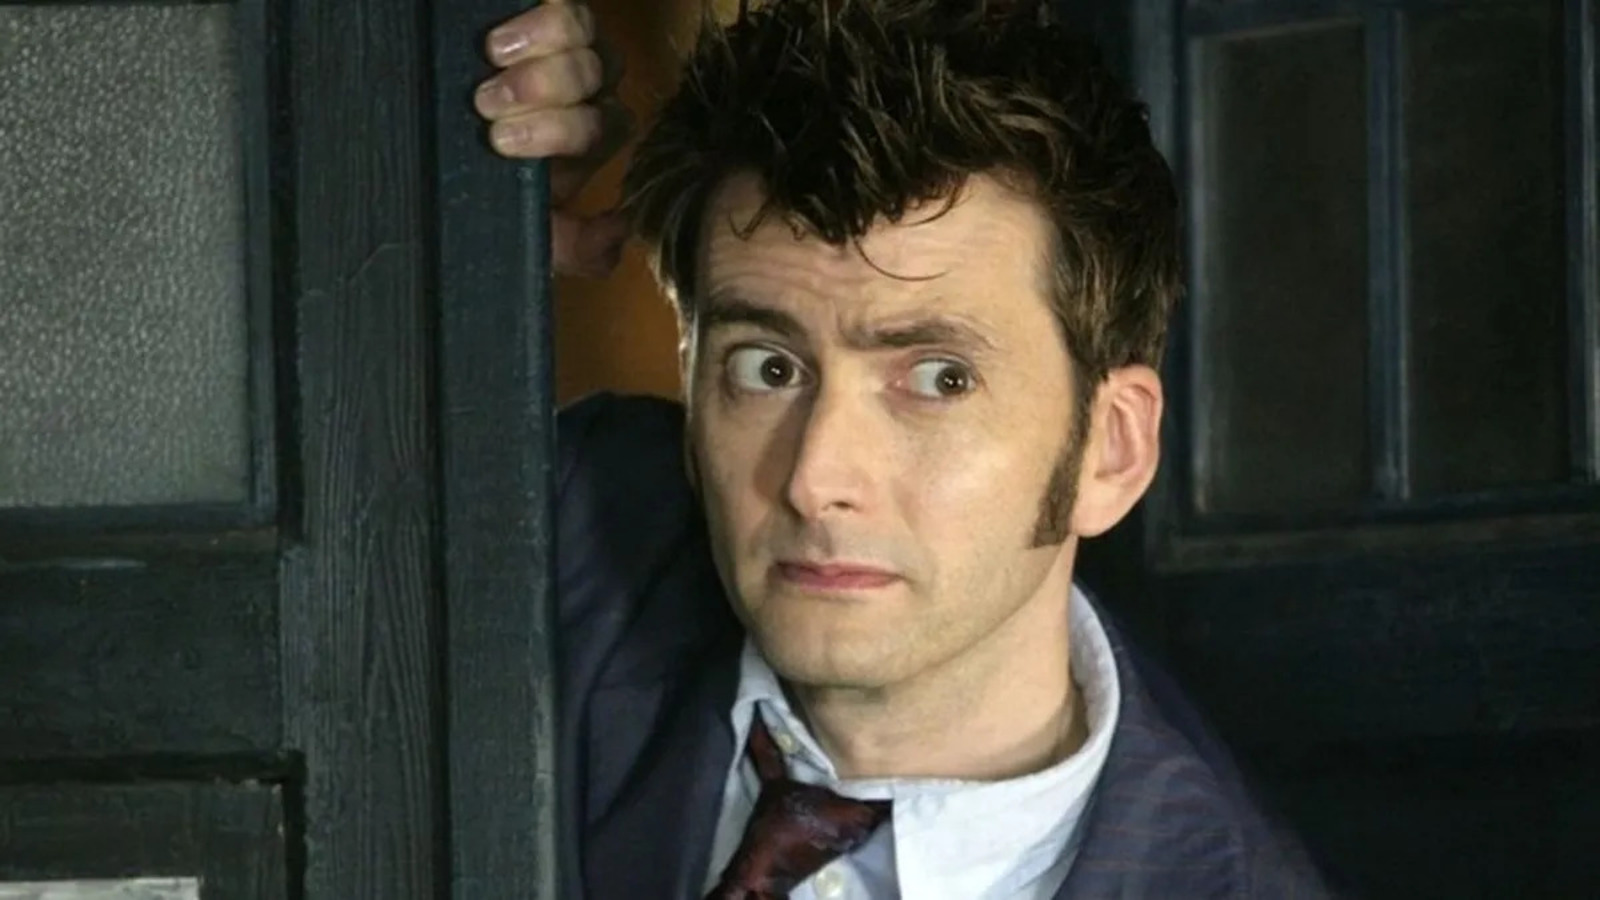 Doctor Who, David Tennant in action in this new image from the 60th anniversary specials